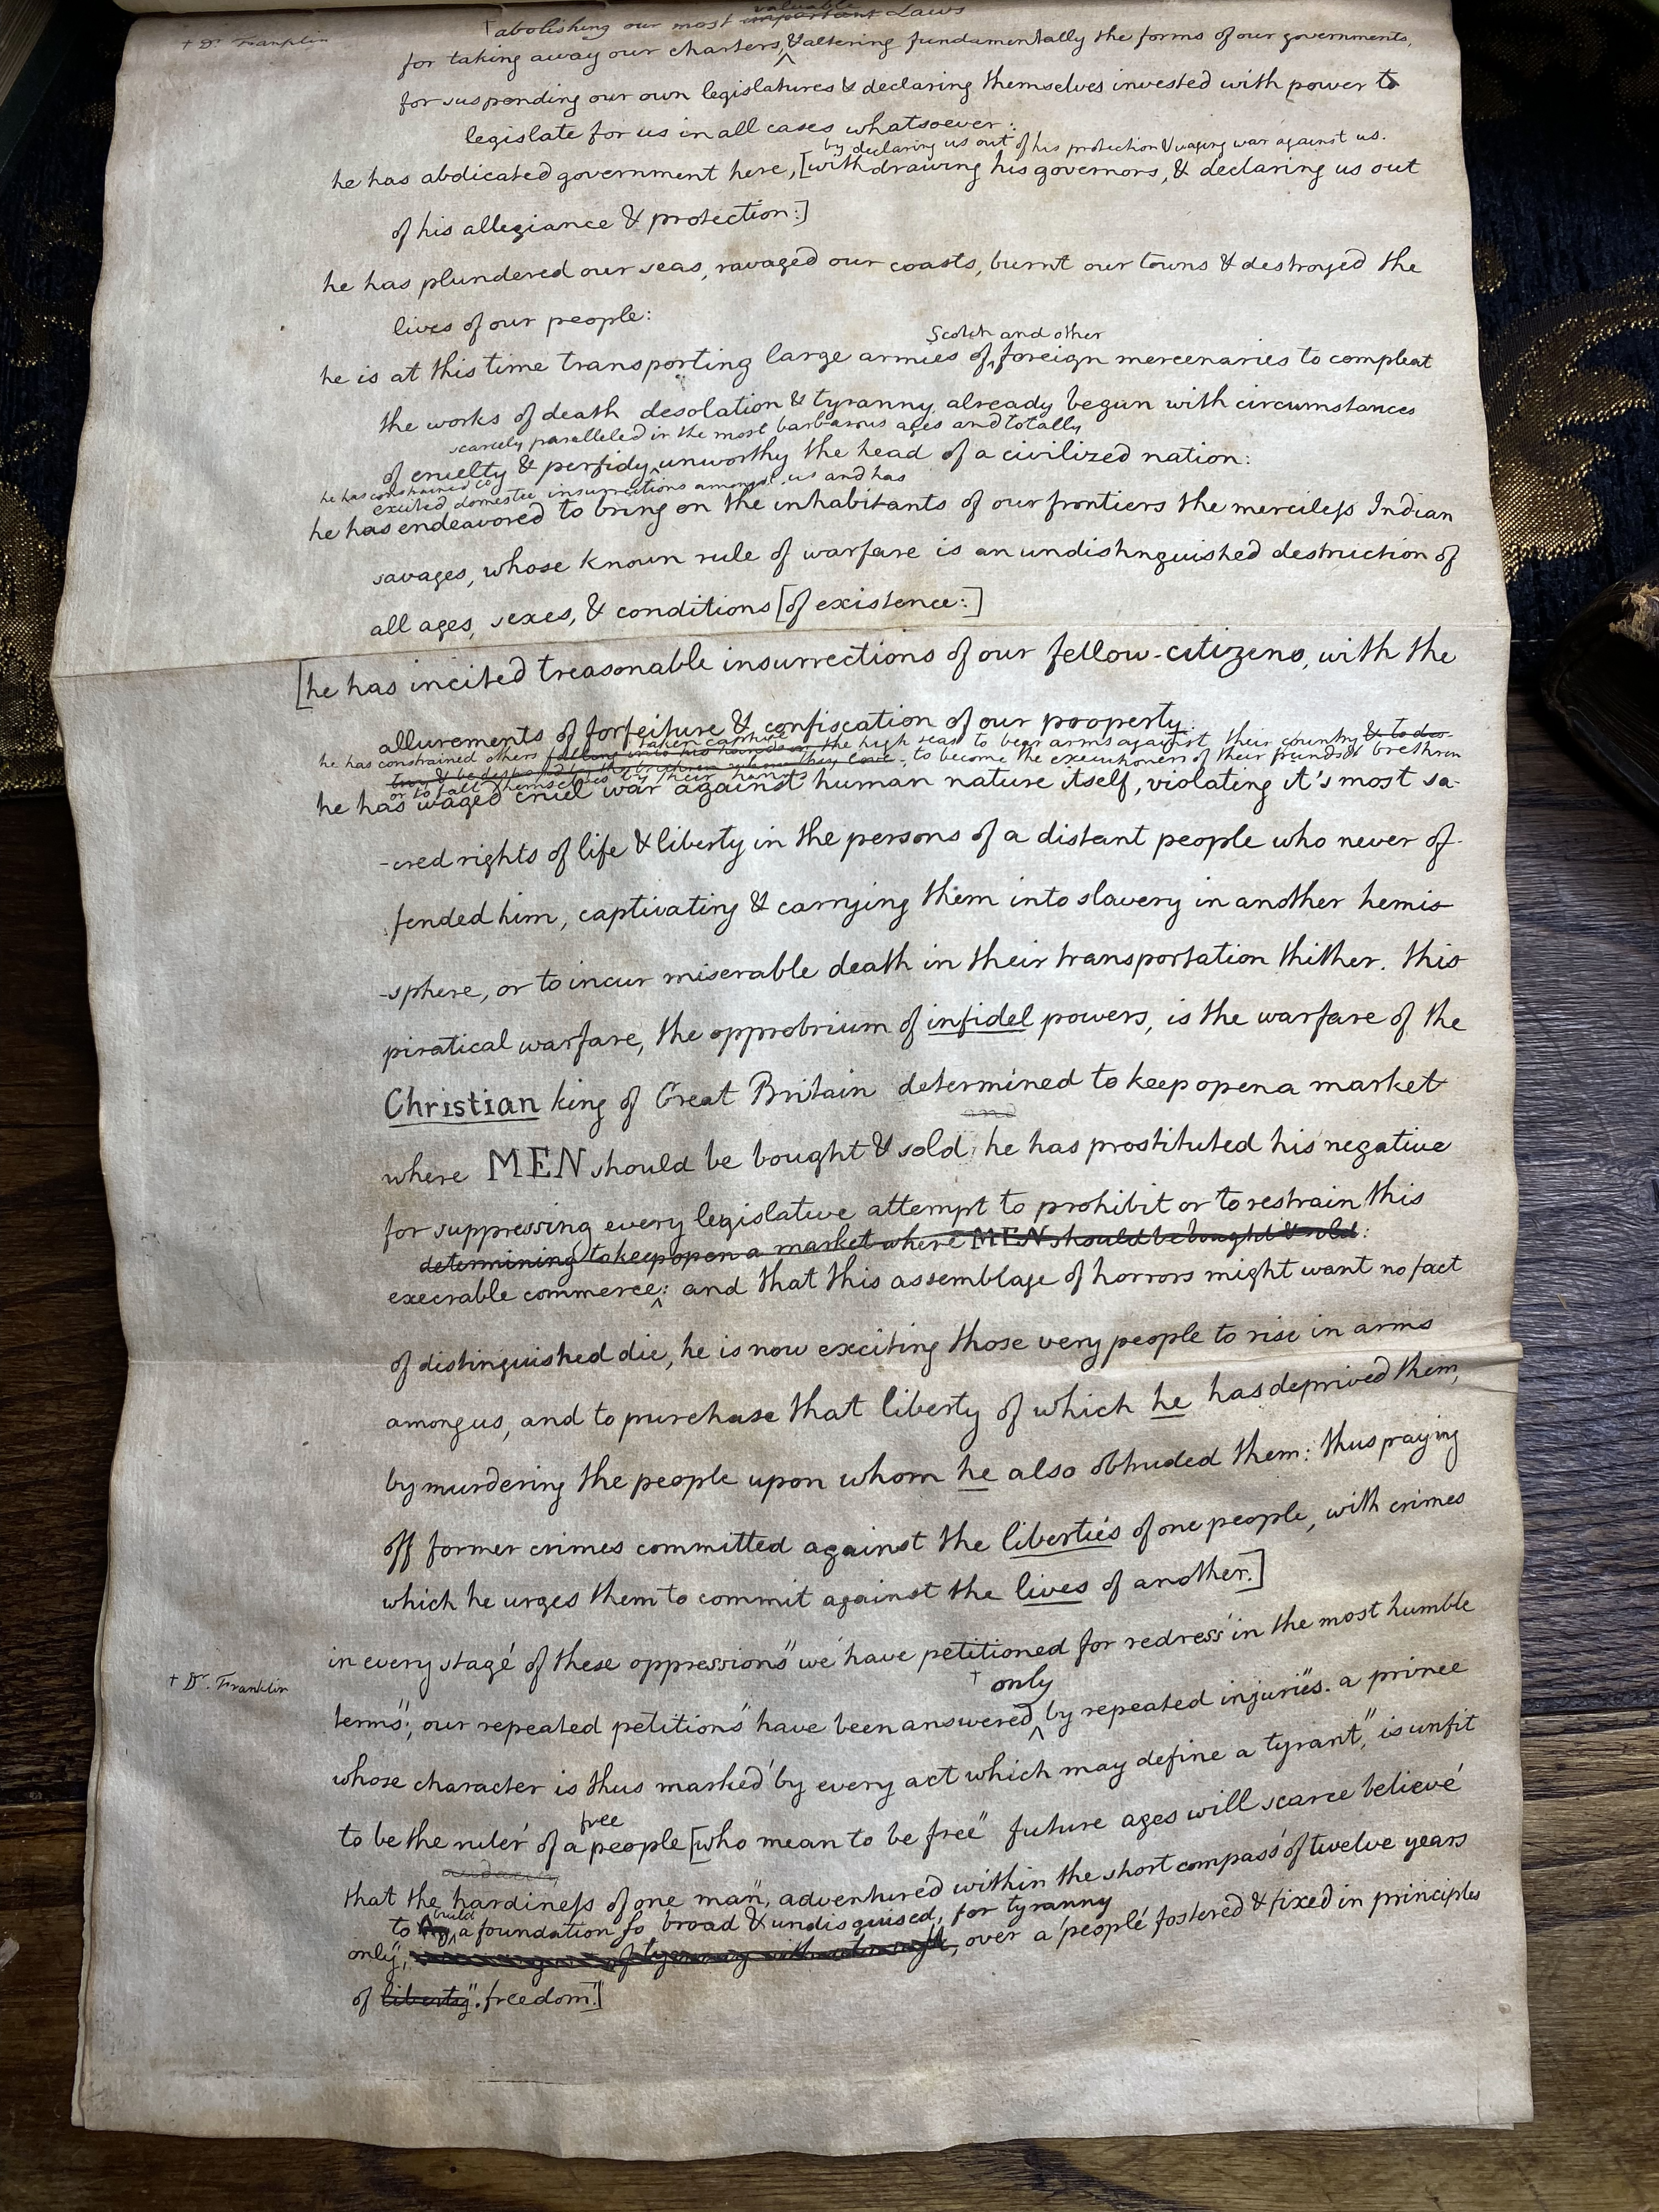 page 3 of the original text of the Declaration of Independence with edits by Thomas Jefferson